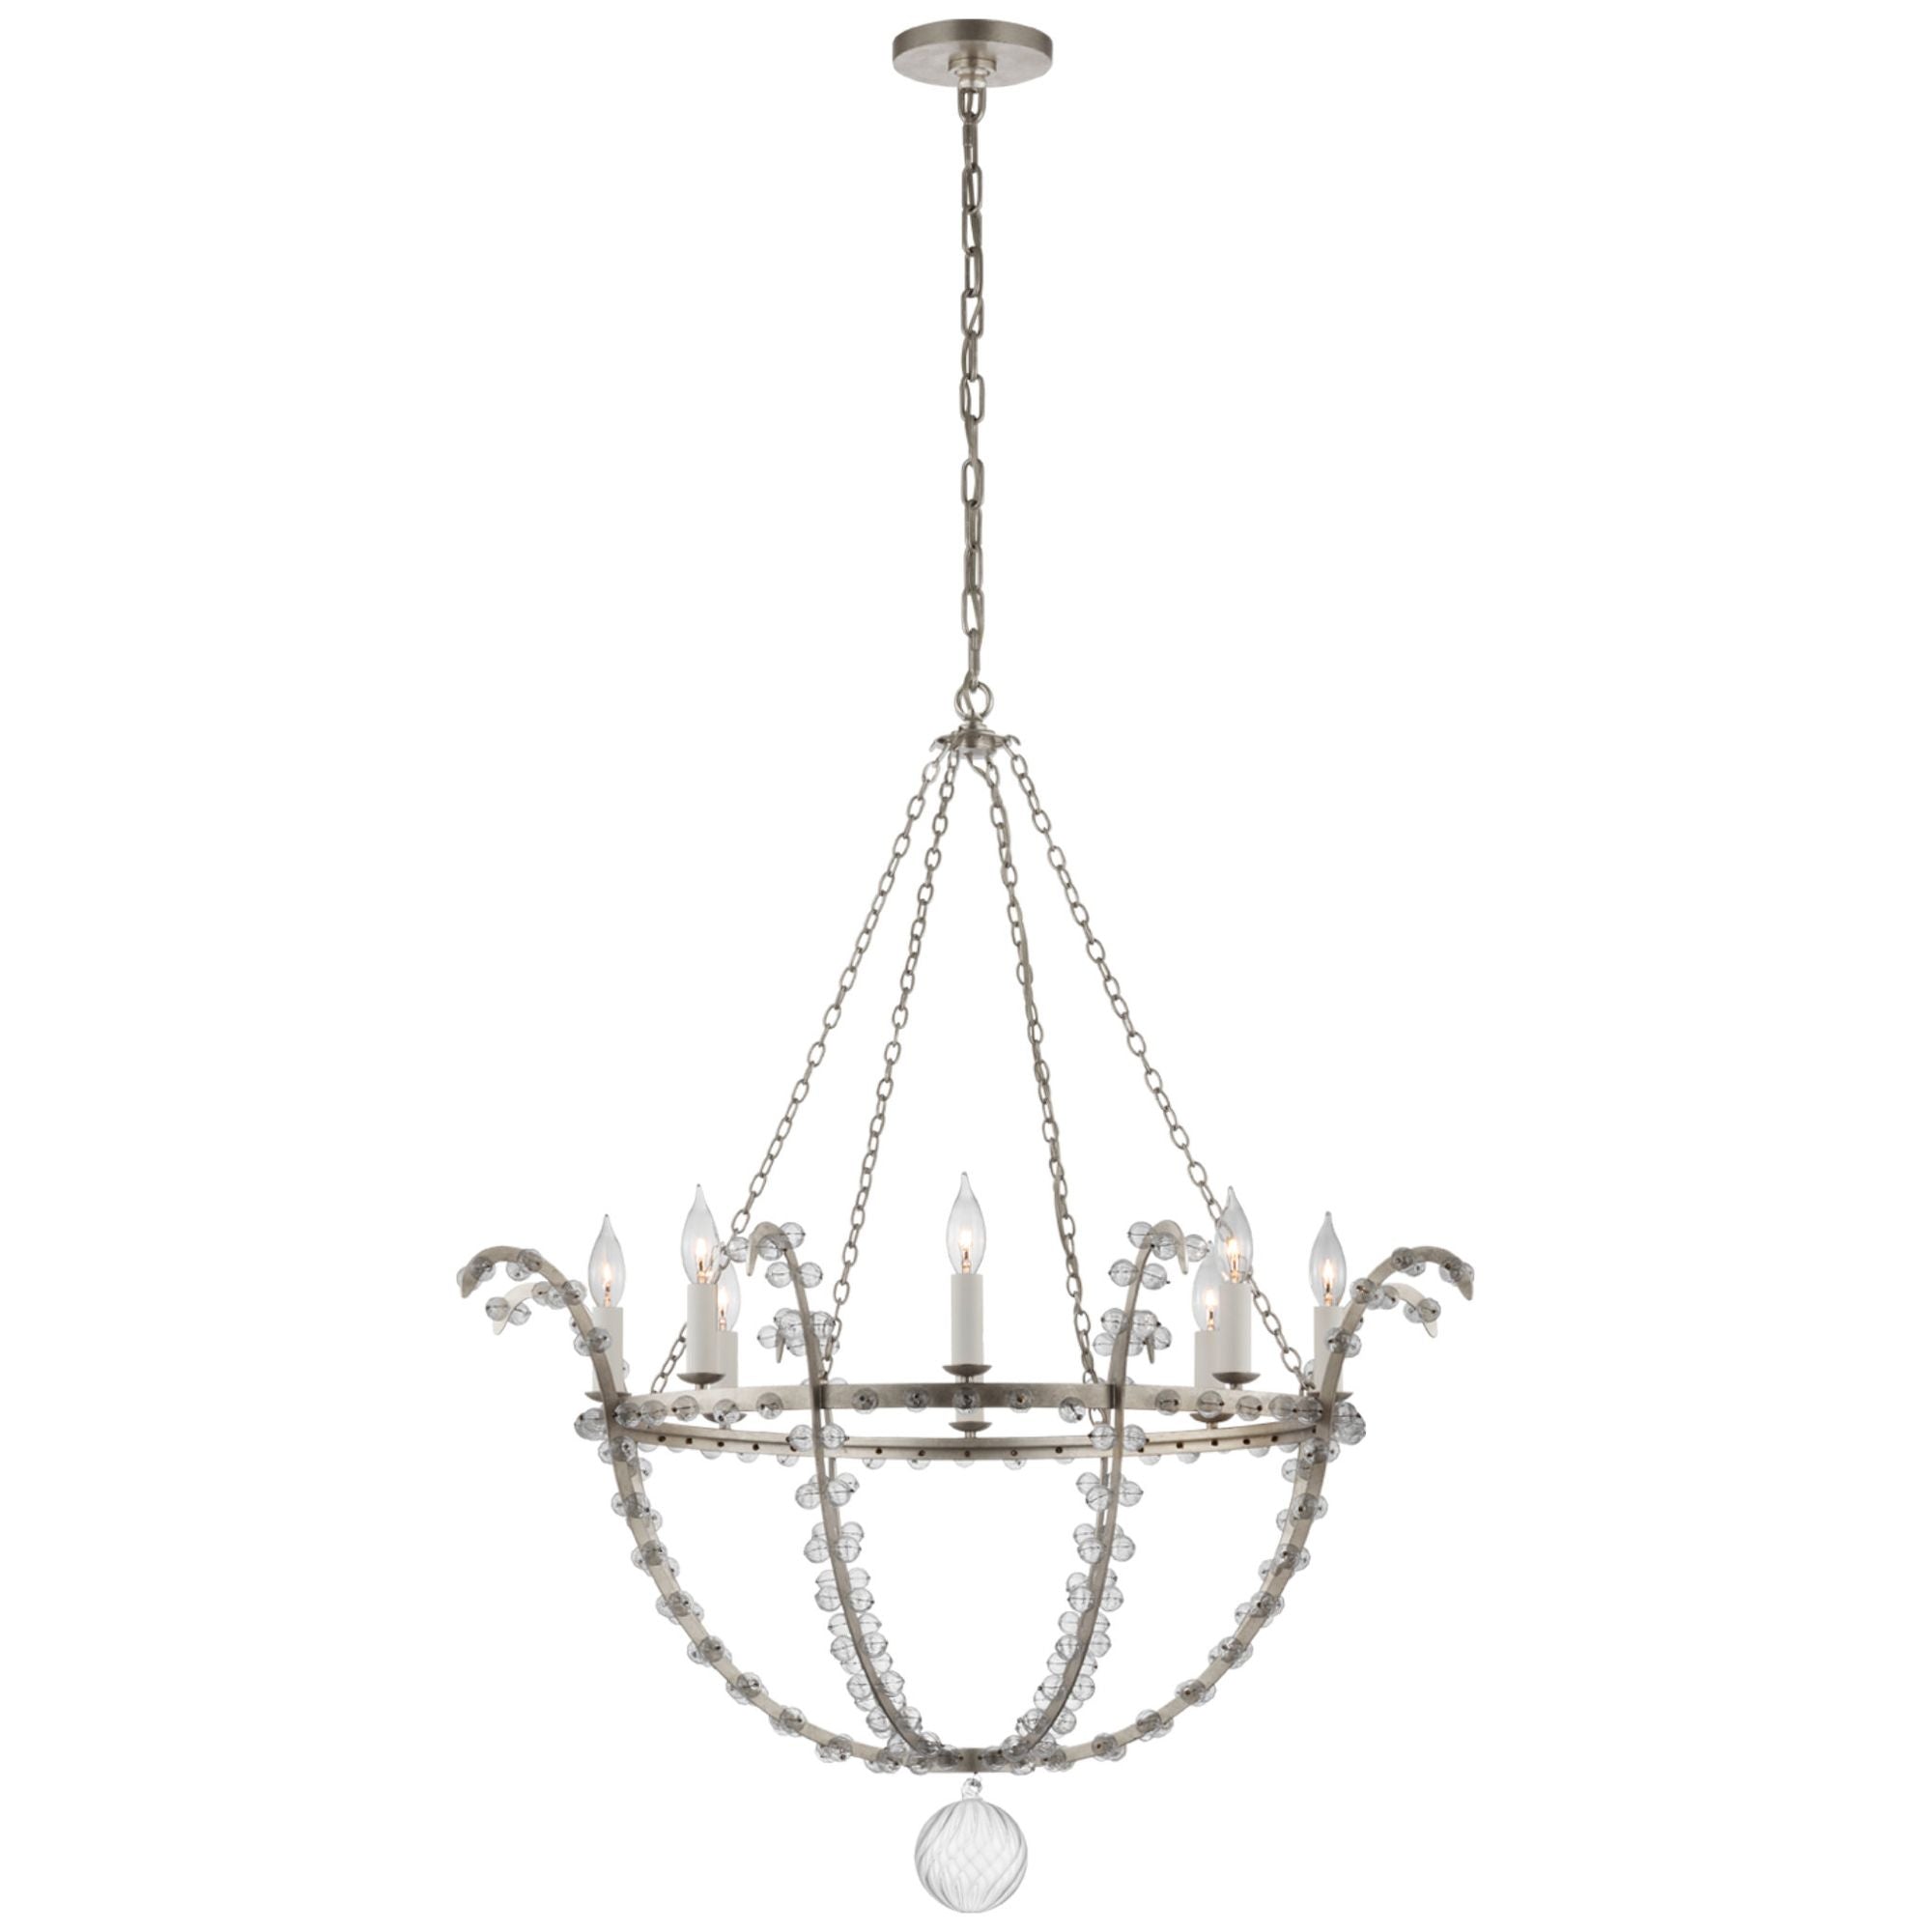 Julie Neill Alonzo Large Chandelier in Burnished Silver Leaf and Clear Glass